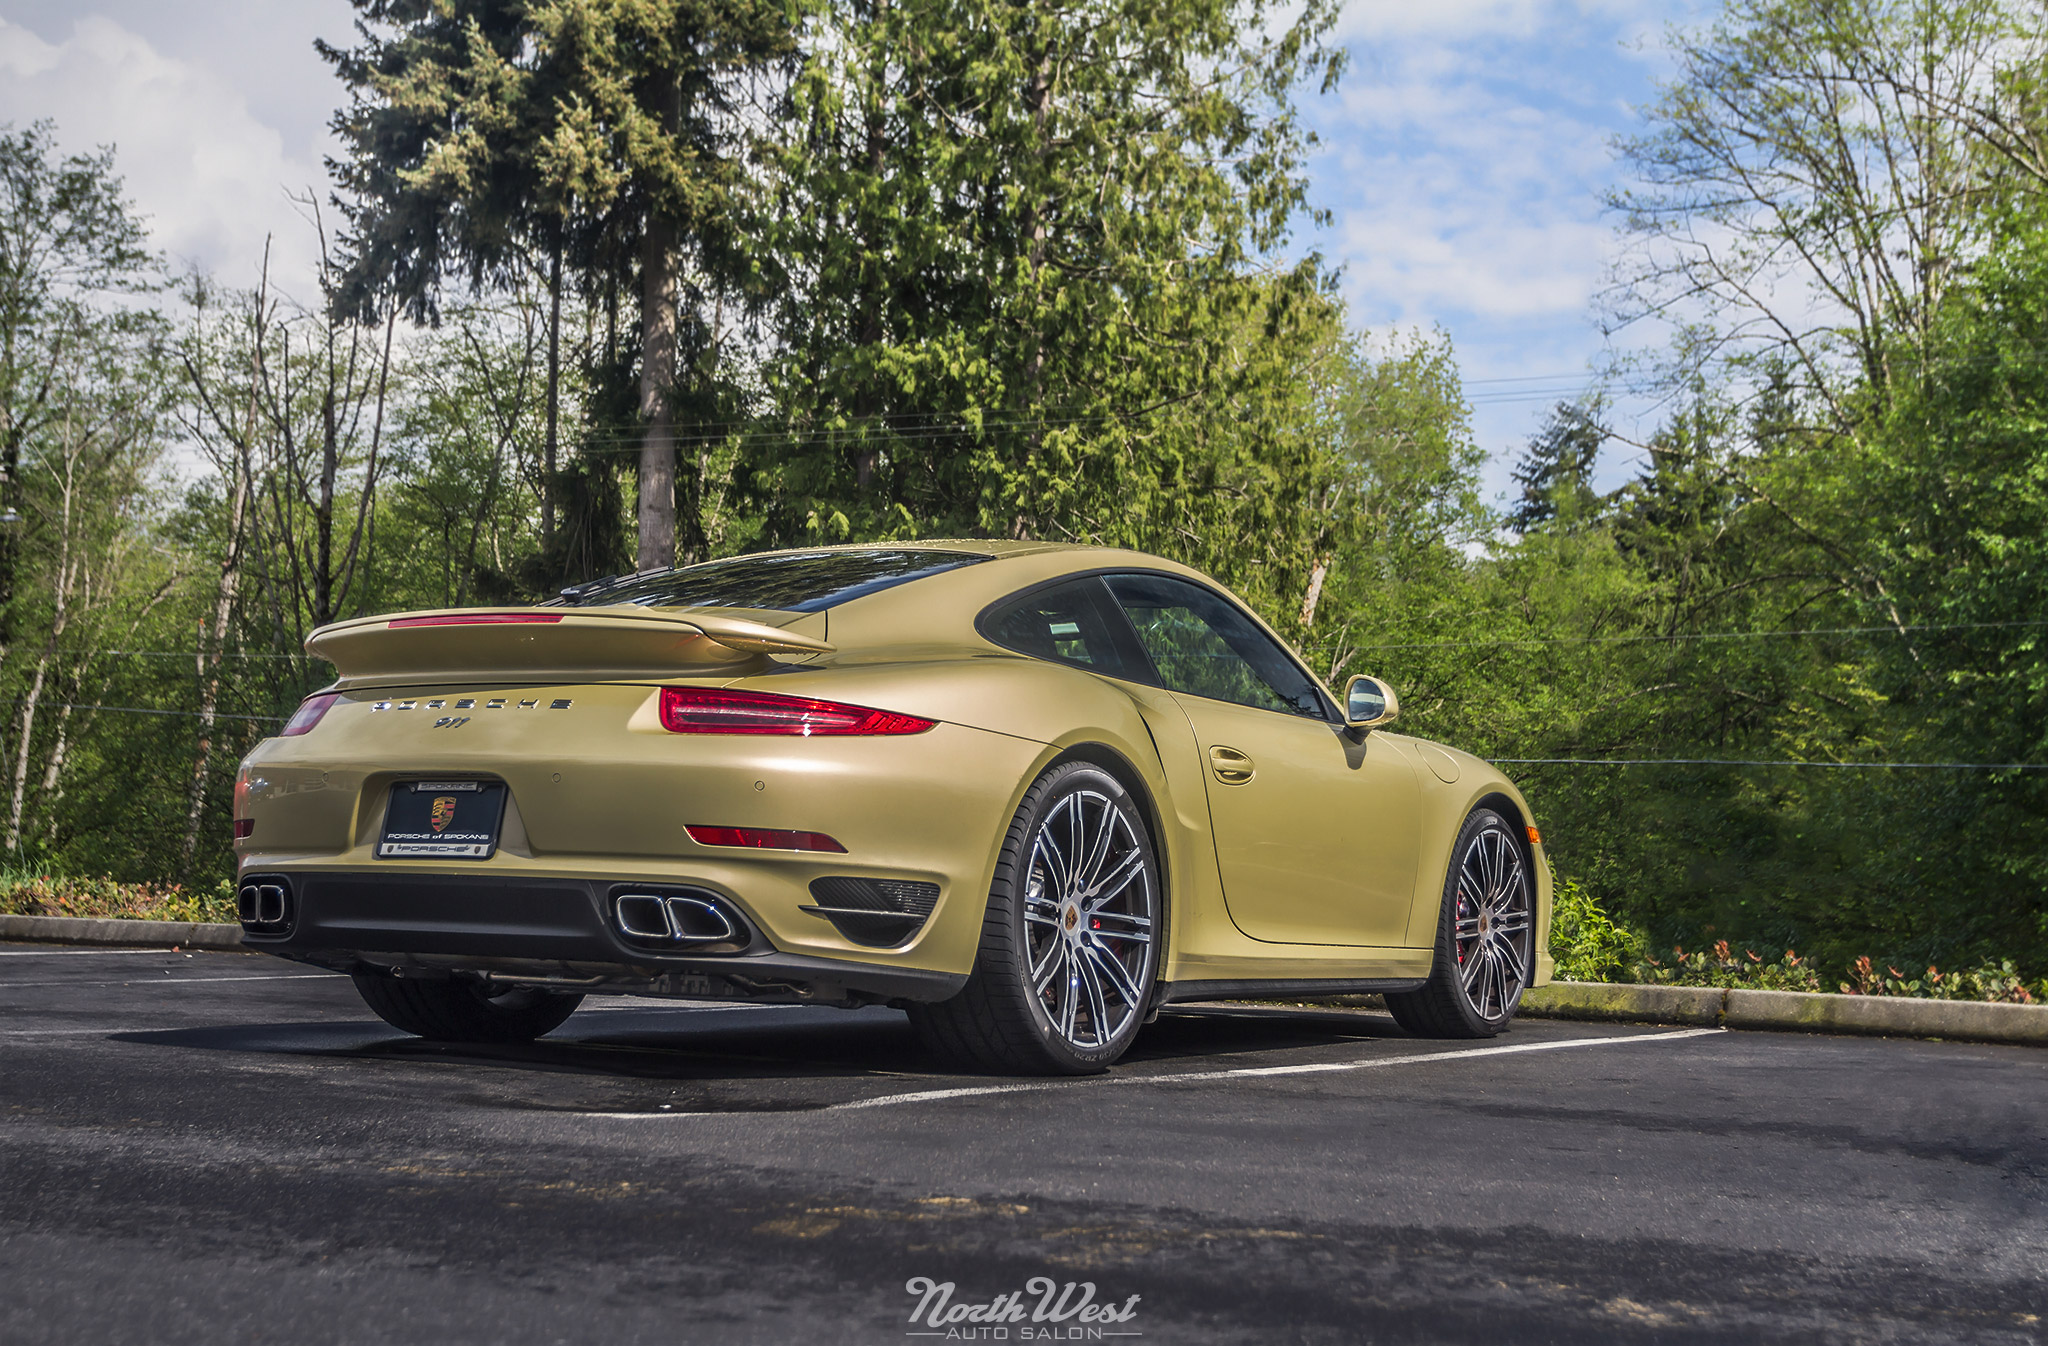 Lime Gold Porsche 911 Turbo detailed & protected at NWAS in Seattle